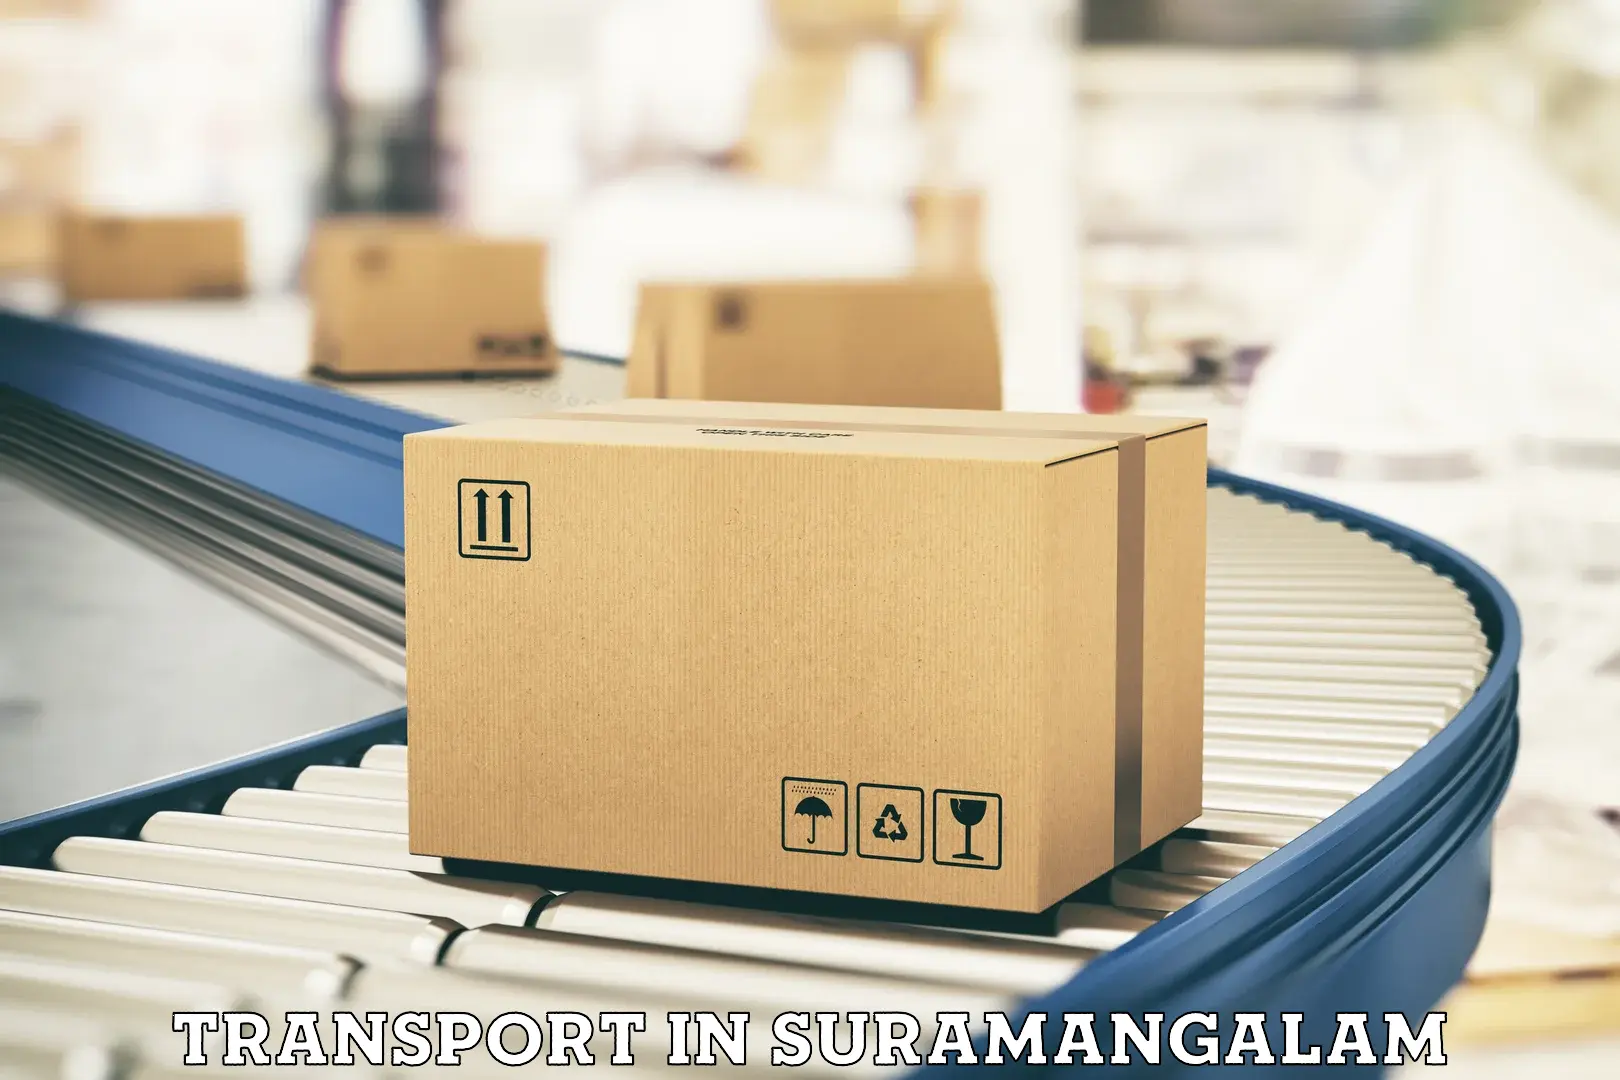 Nationwide transport services in Suramangalam